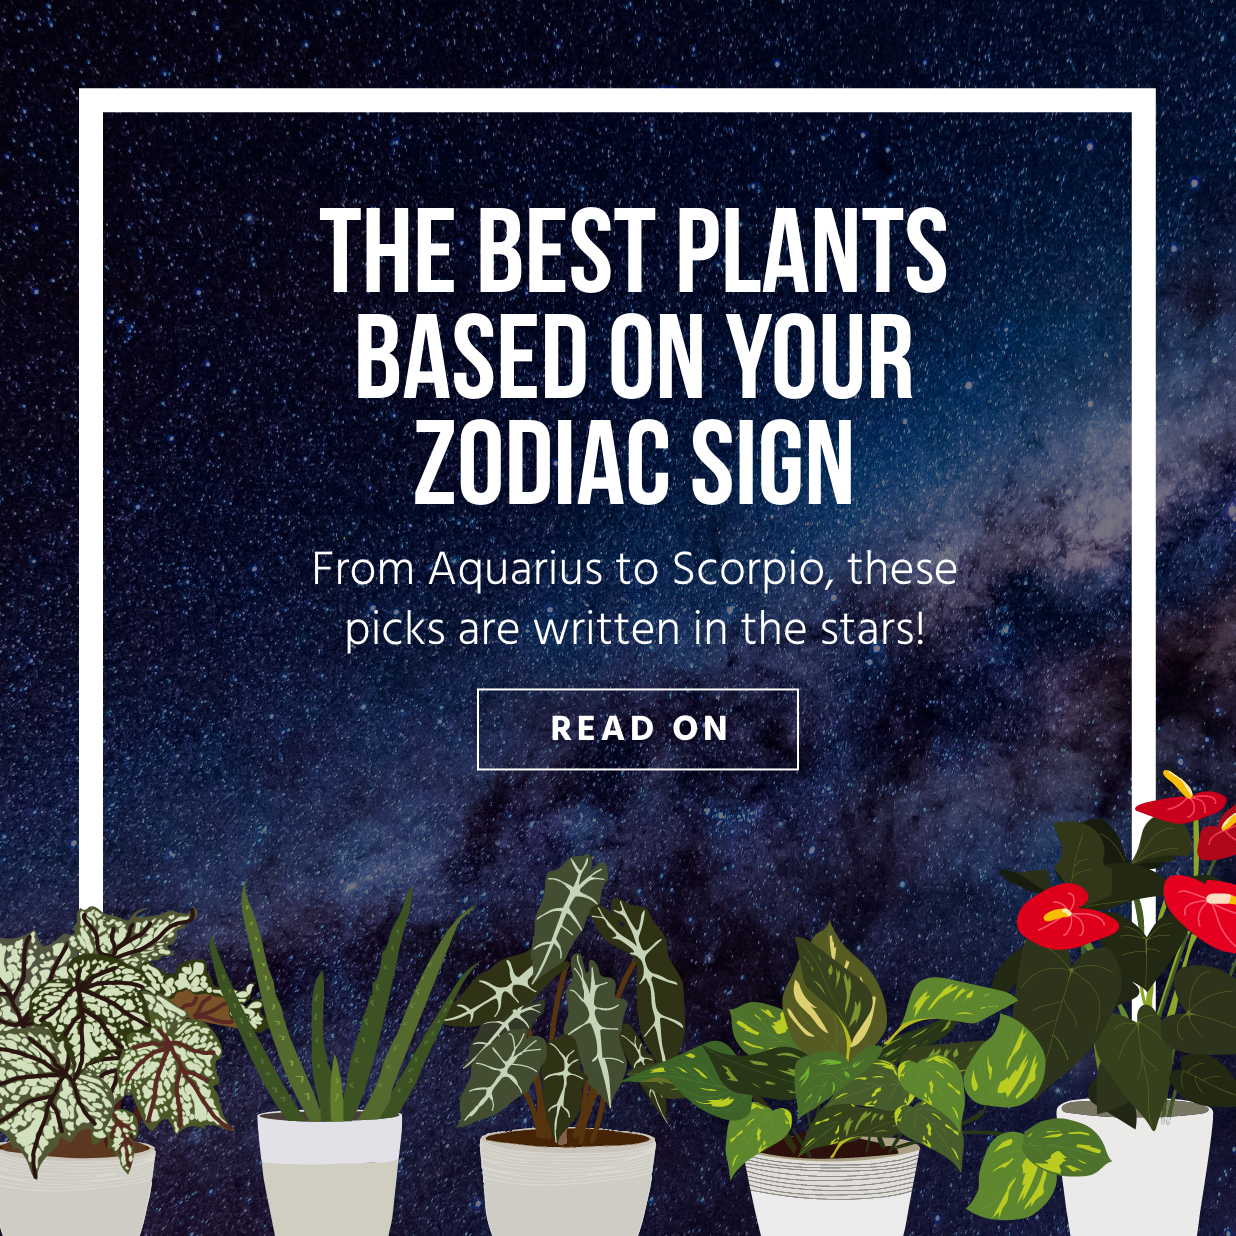 The Best Plants Based on Your Zodiac Sign